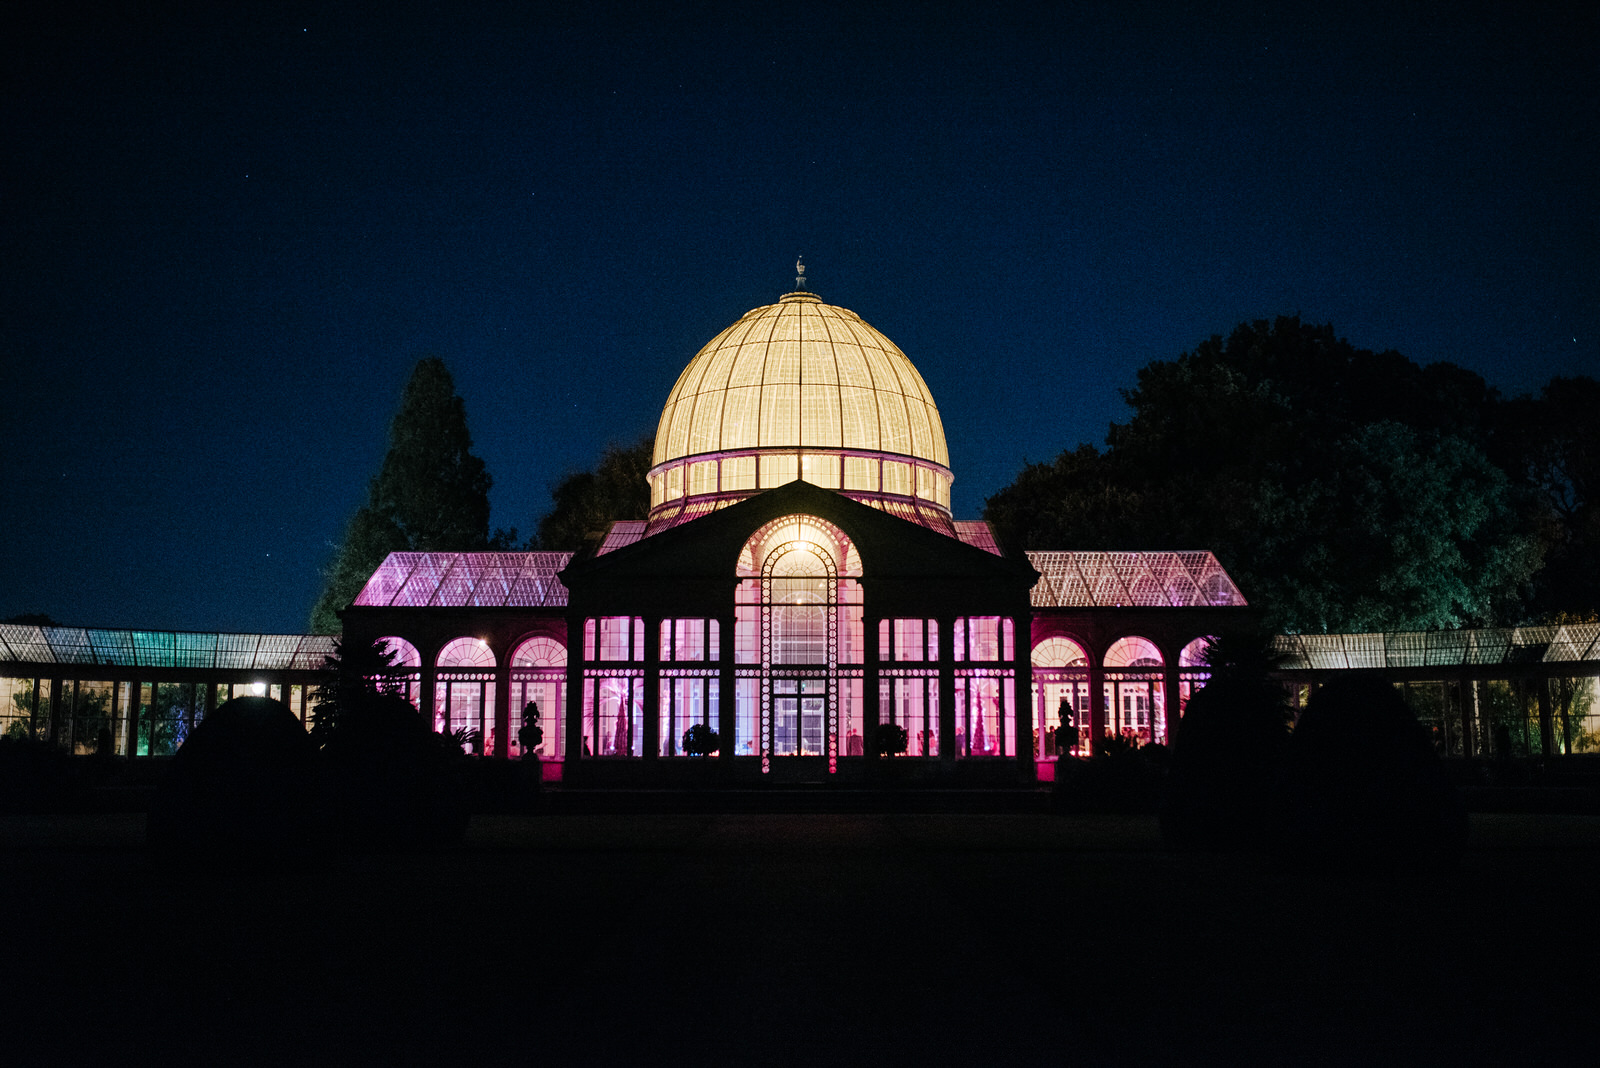 Night-time venue photograph of Syon Park's Great Conservatory